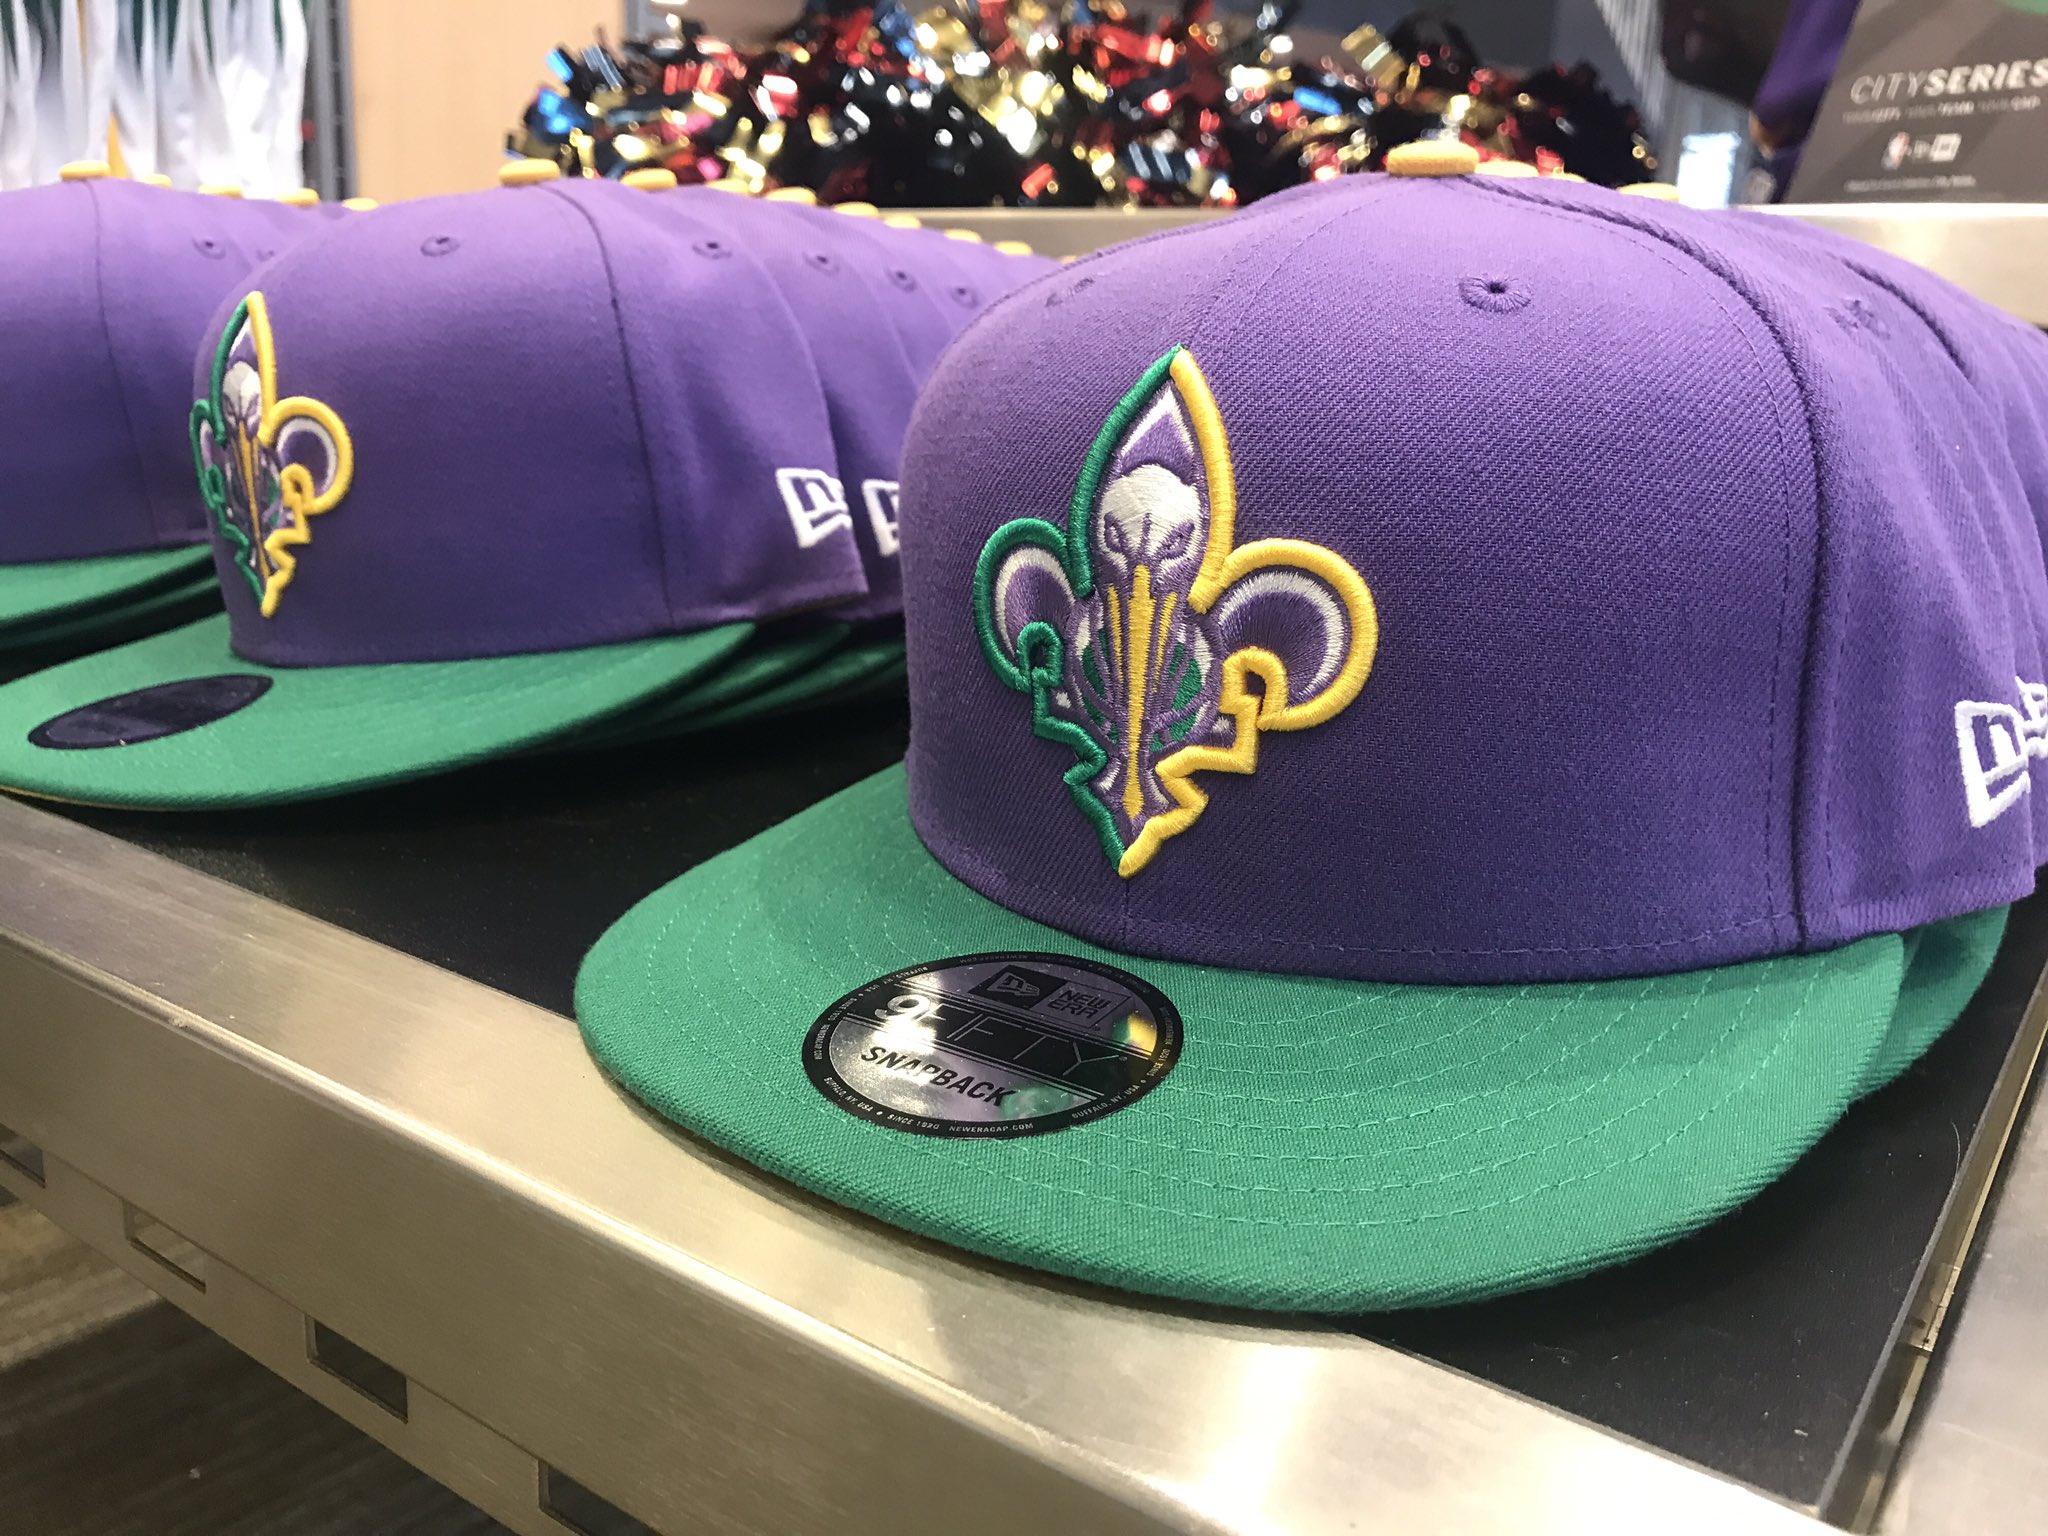 New Orleans Pelicans on X: Our City edition Mardi Gras gear is on the  racks at the Pelicans Team Shop! Stop by and suit up 🛍 #PelicansGameday